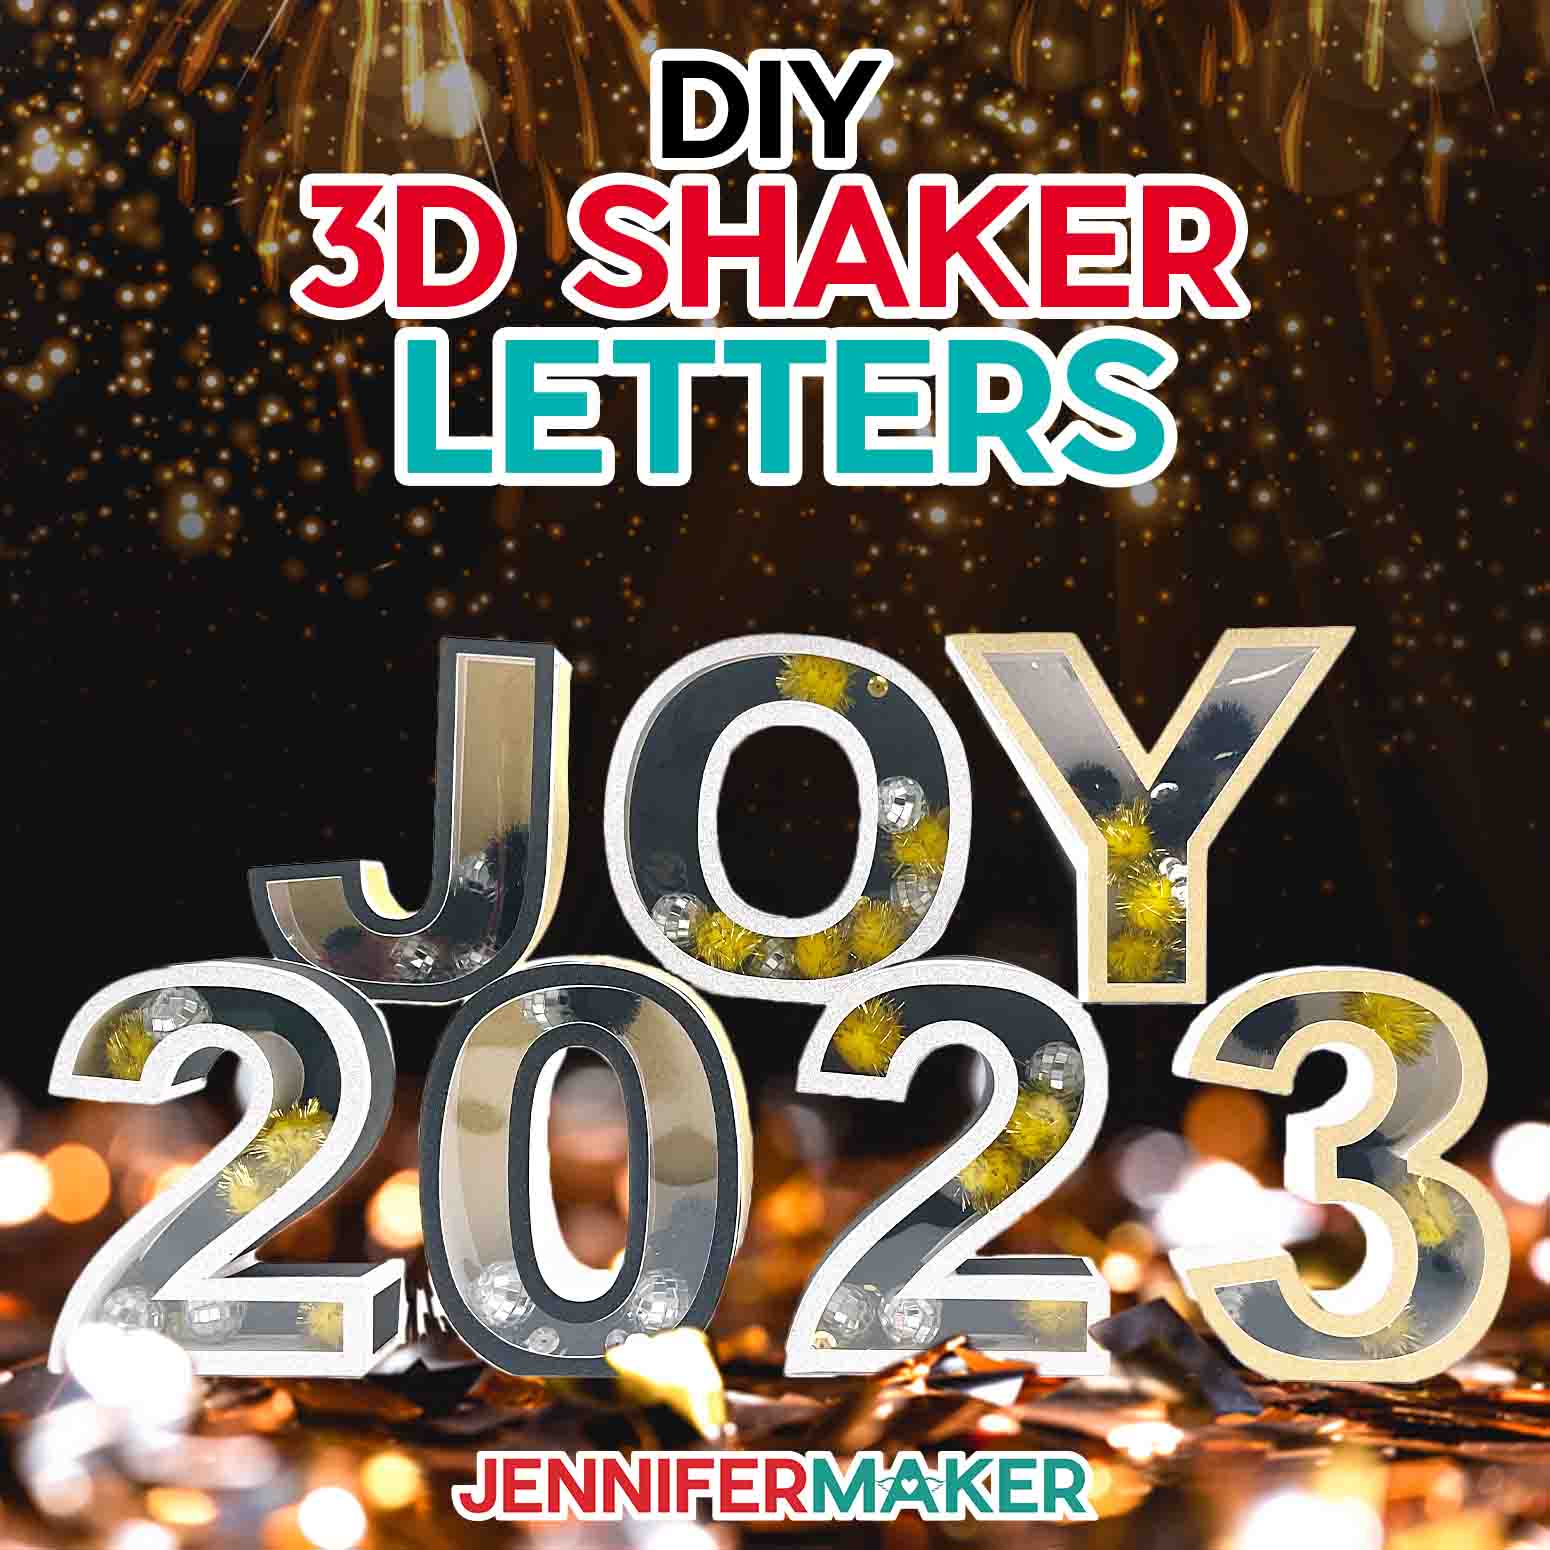 3D Letters With Shaker Pieces to Celebrate the New Year!